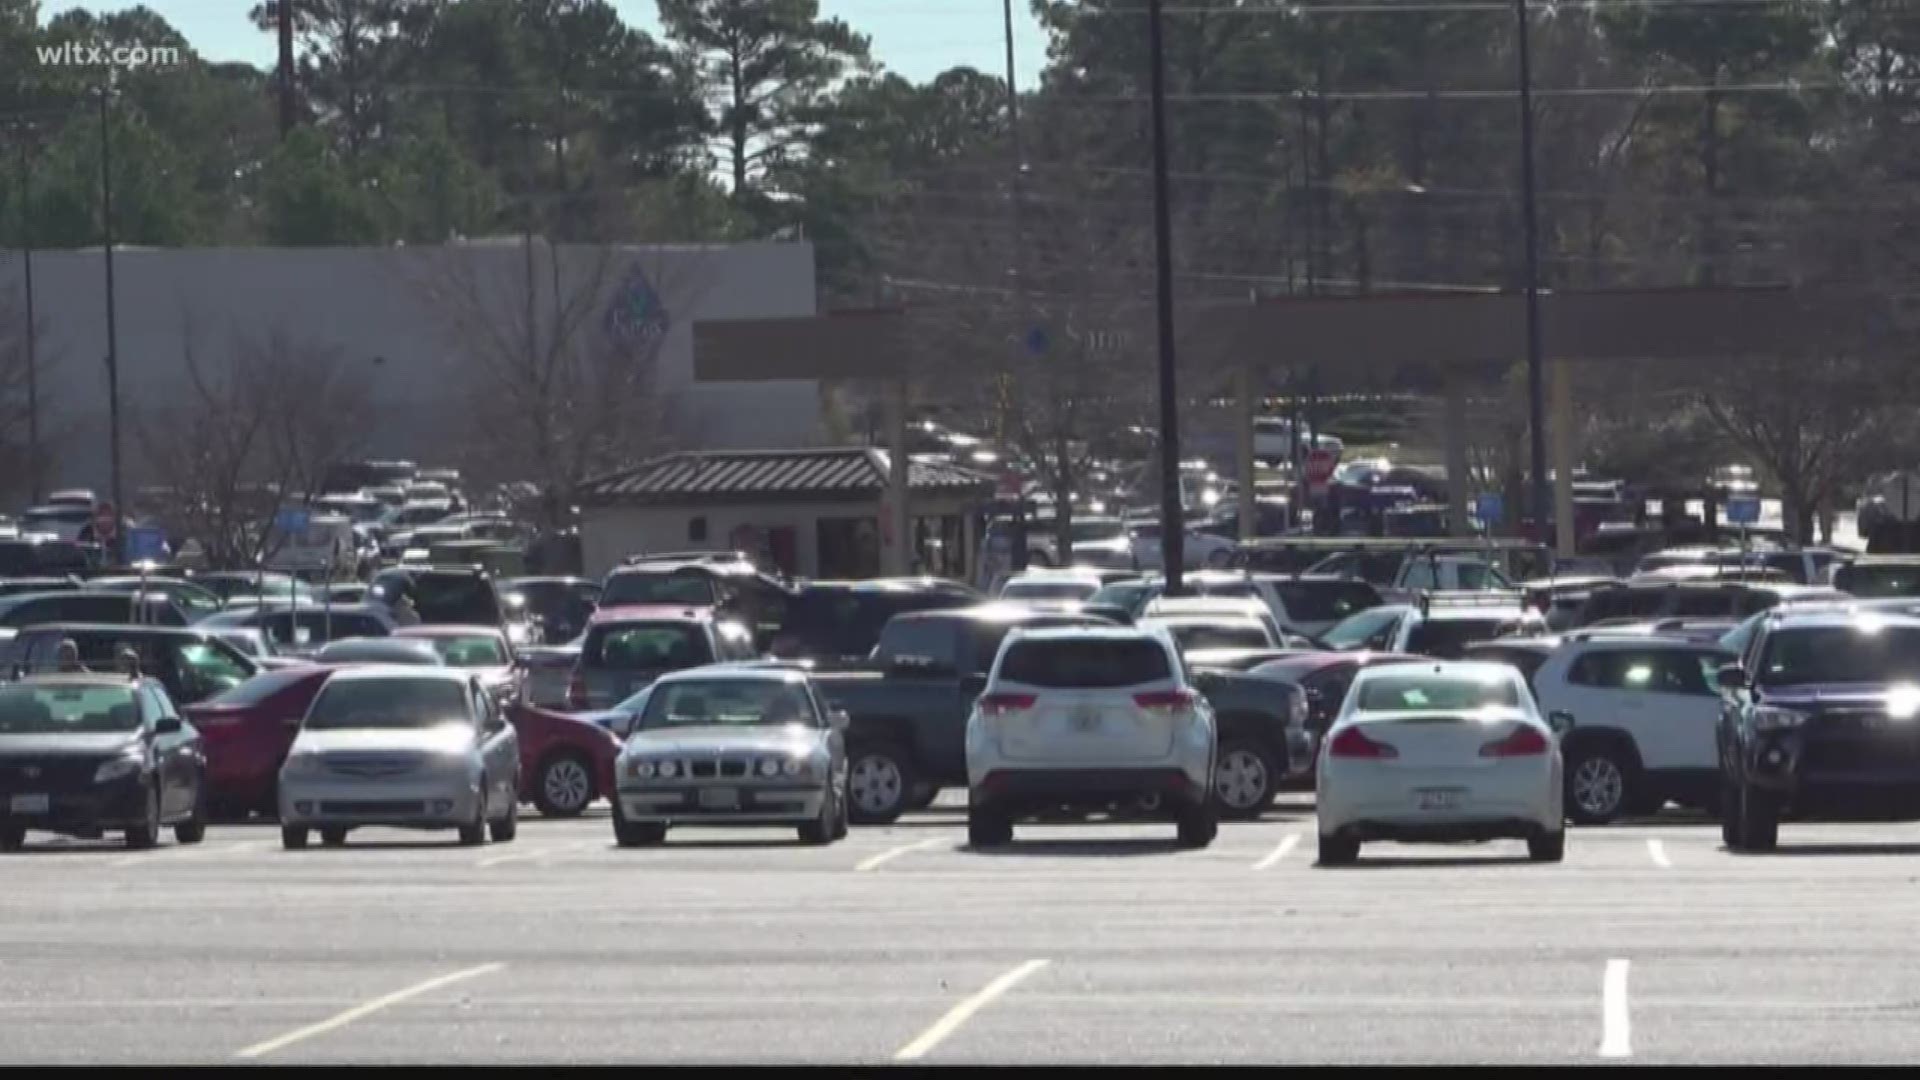 It was a beautiful day for last minute shopping in Columbia, and hundreds of people took advantage of it.